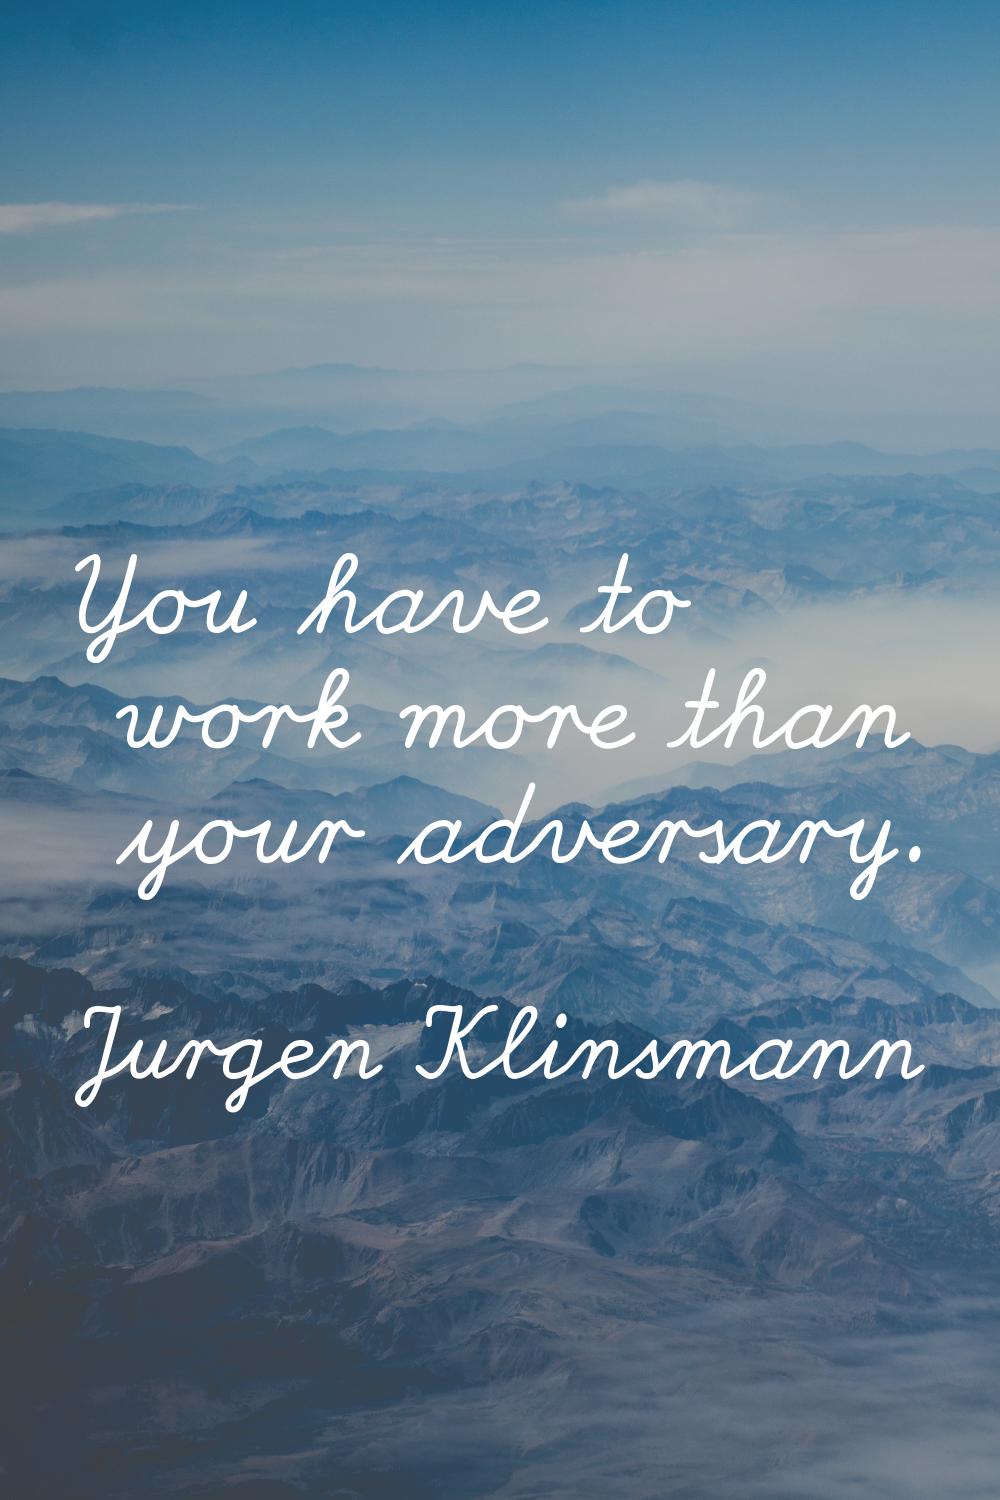 You have to work more than your adversary.